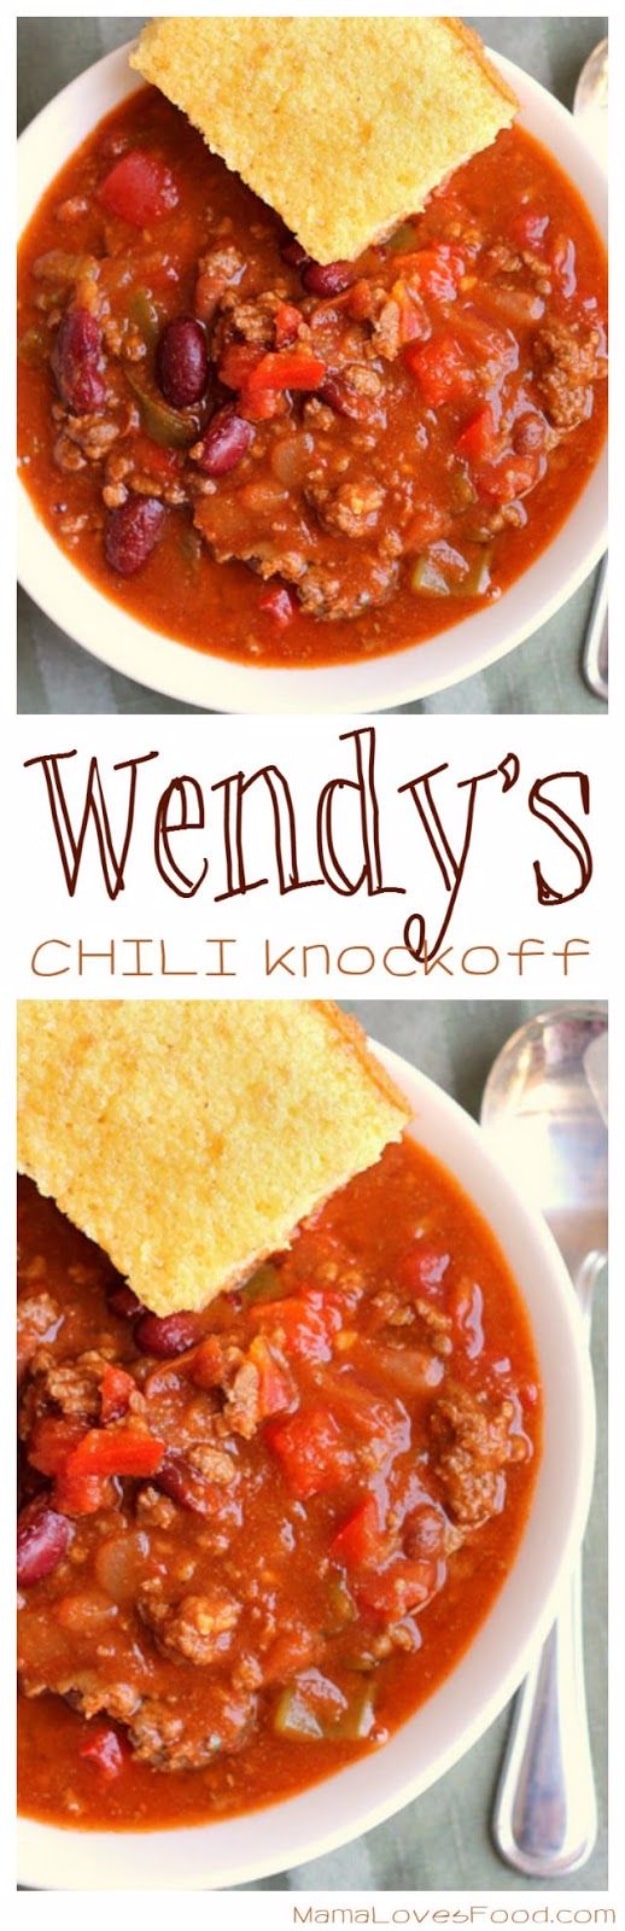  Best Copycat Recipes From Top Restaurants - Wendy's Chili Knock Off - Awesome Recipe Knockoffs and Recipe Ideas from Chipotle Restaurant, Starbucks, Olive Garden, Cinabbon, Cracker Barrel, Taco Bell, Cheesecake Factory, KFC, Mc Donalds, Red Lobster, Panda Express #recipes #copycat #dinnerideas 